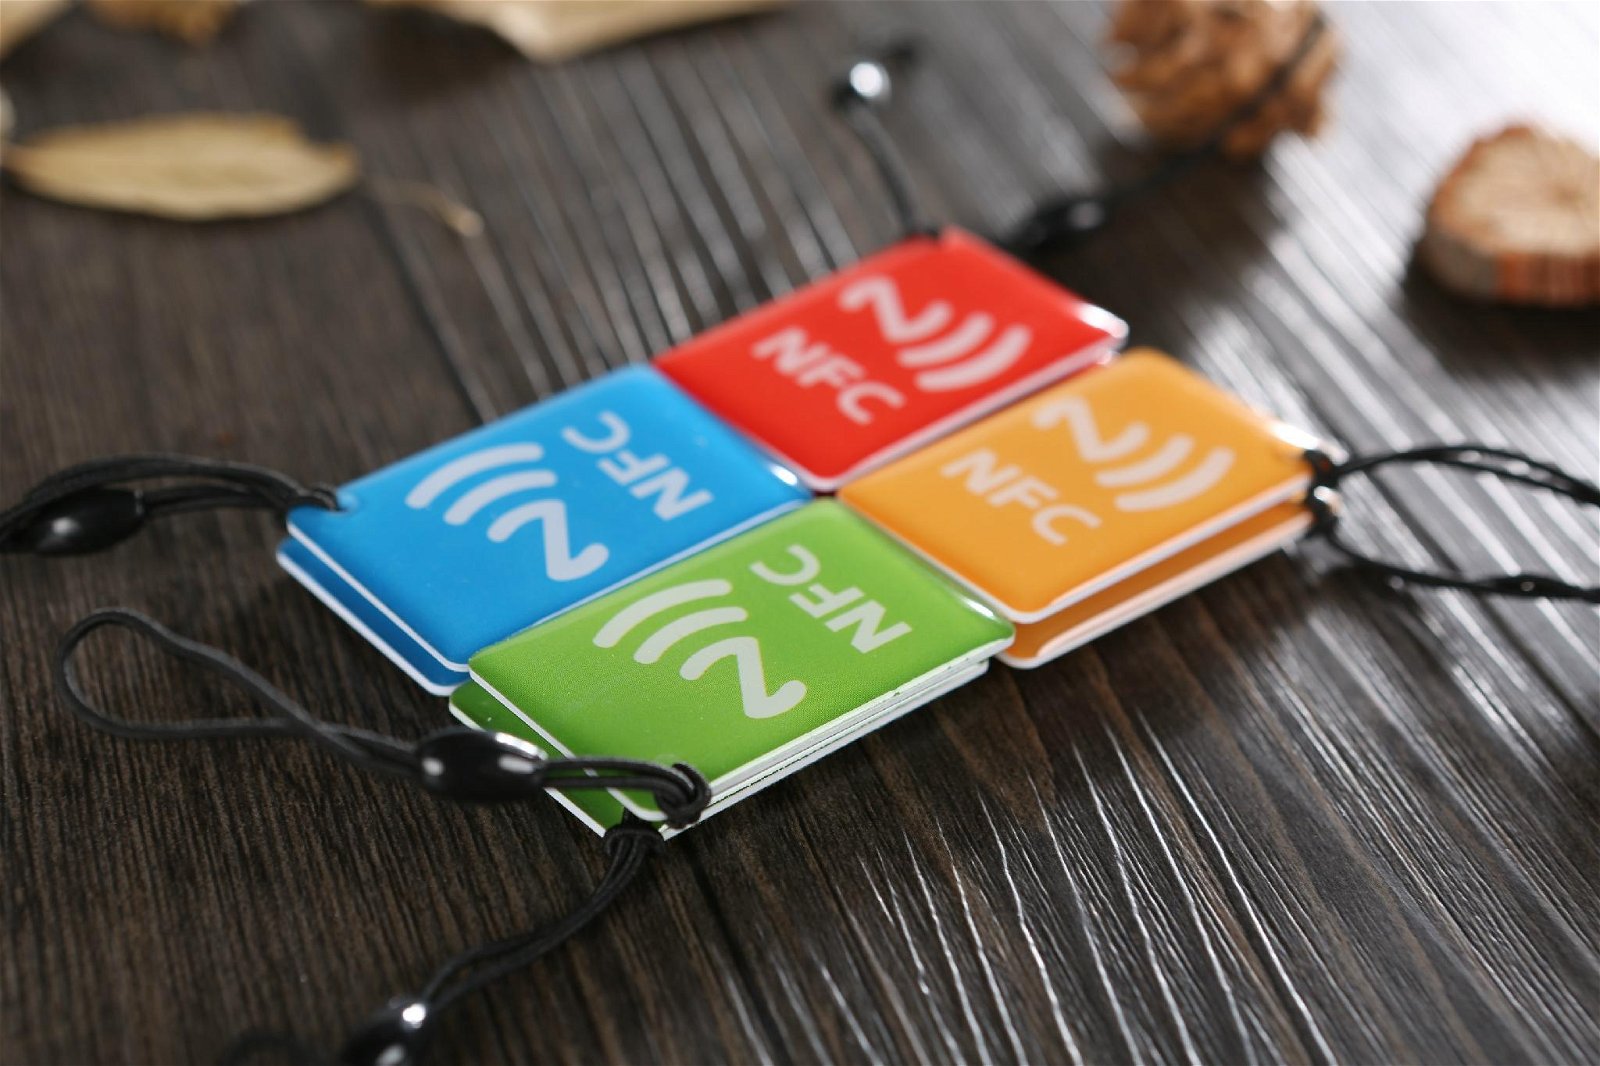 Waterproof Ntag203 NFC Smart Tags for Samsung Note3 S4 Nokia Lumia 920 Oppo HTC 2